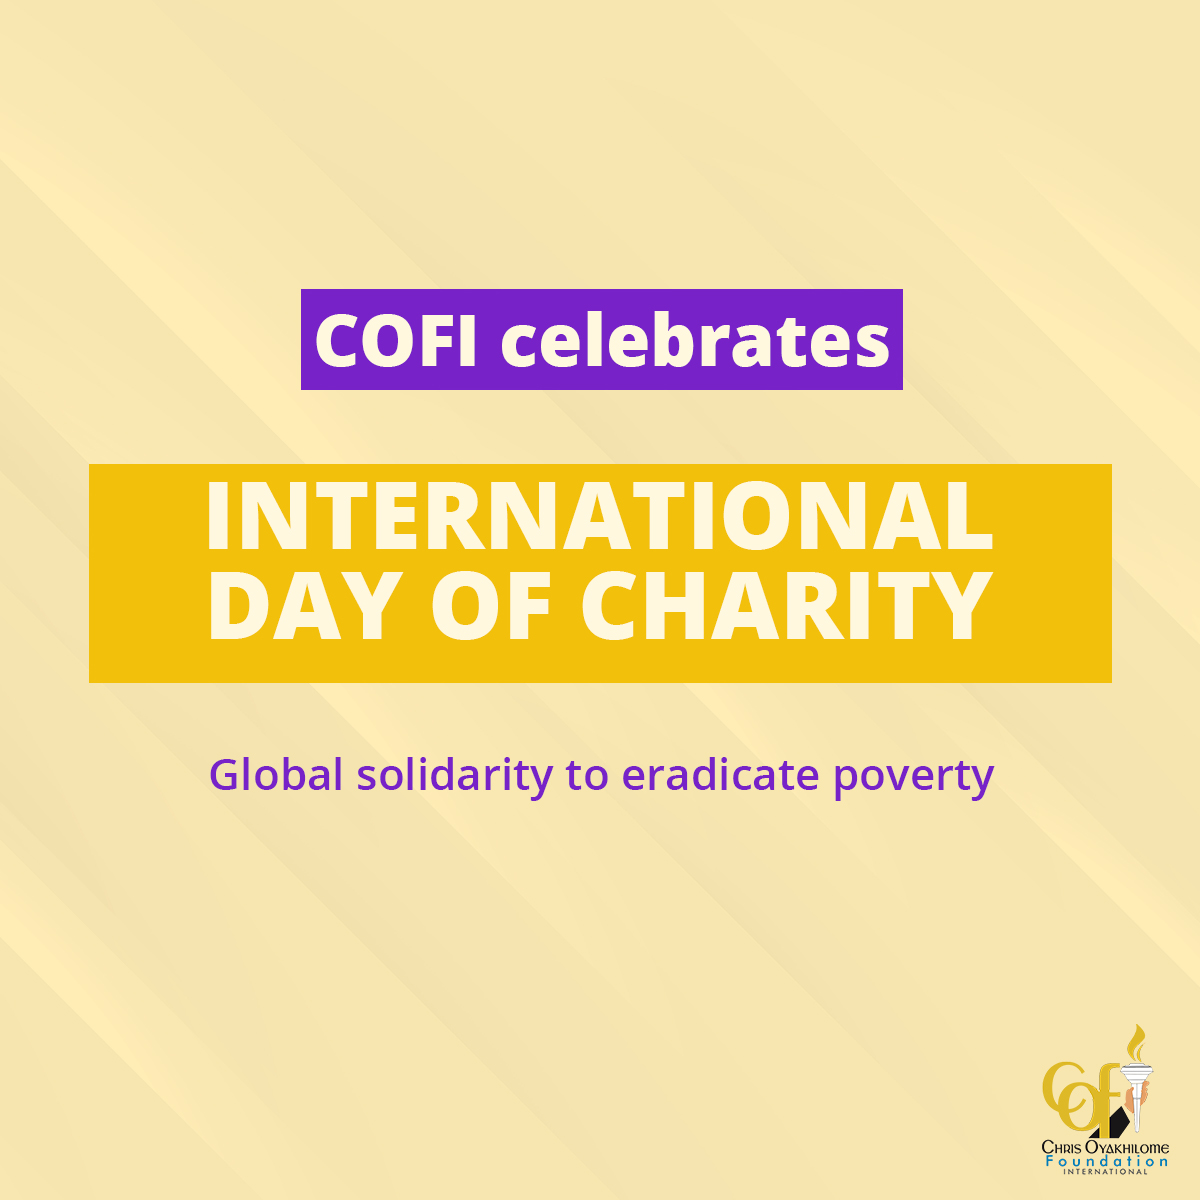 International Day of Charity with COFI